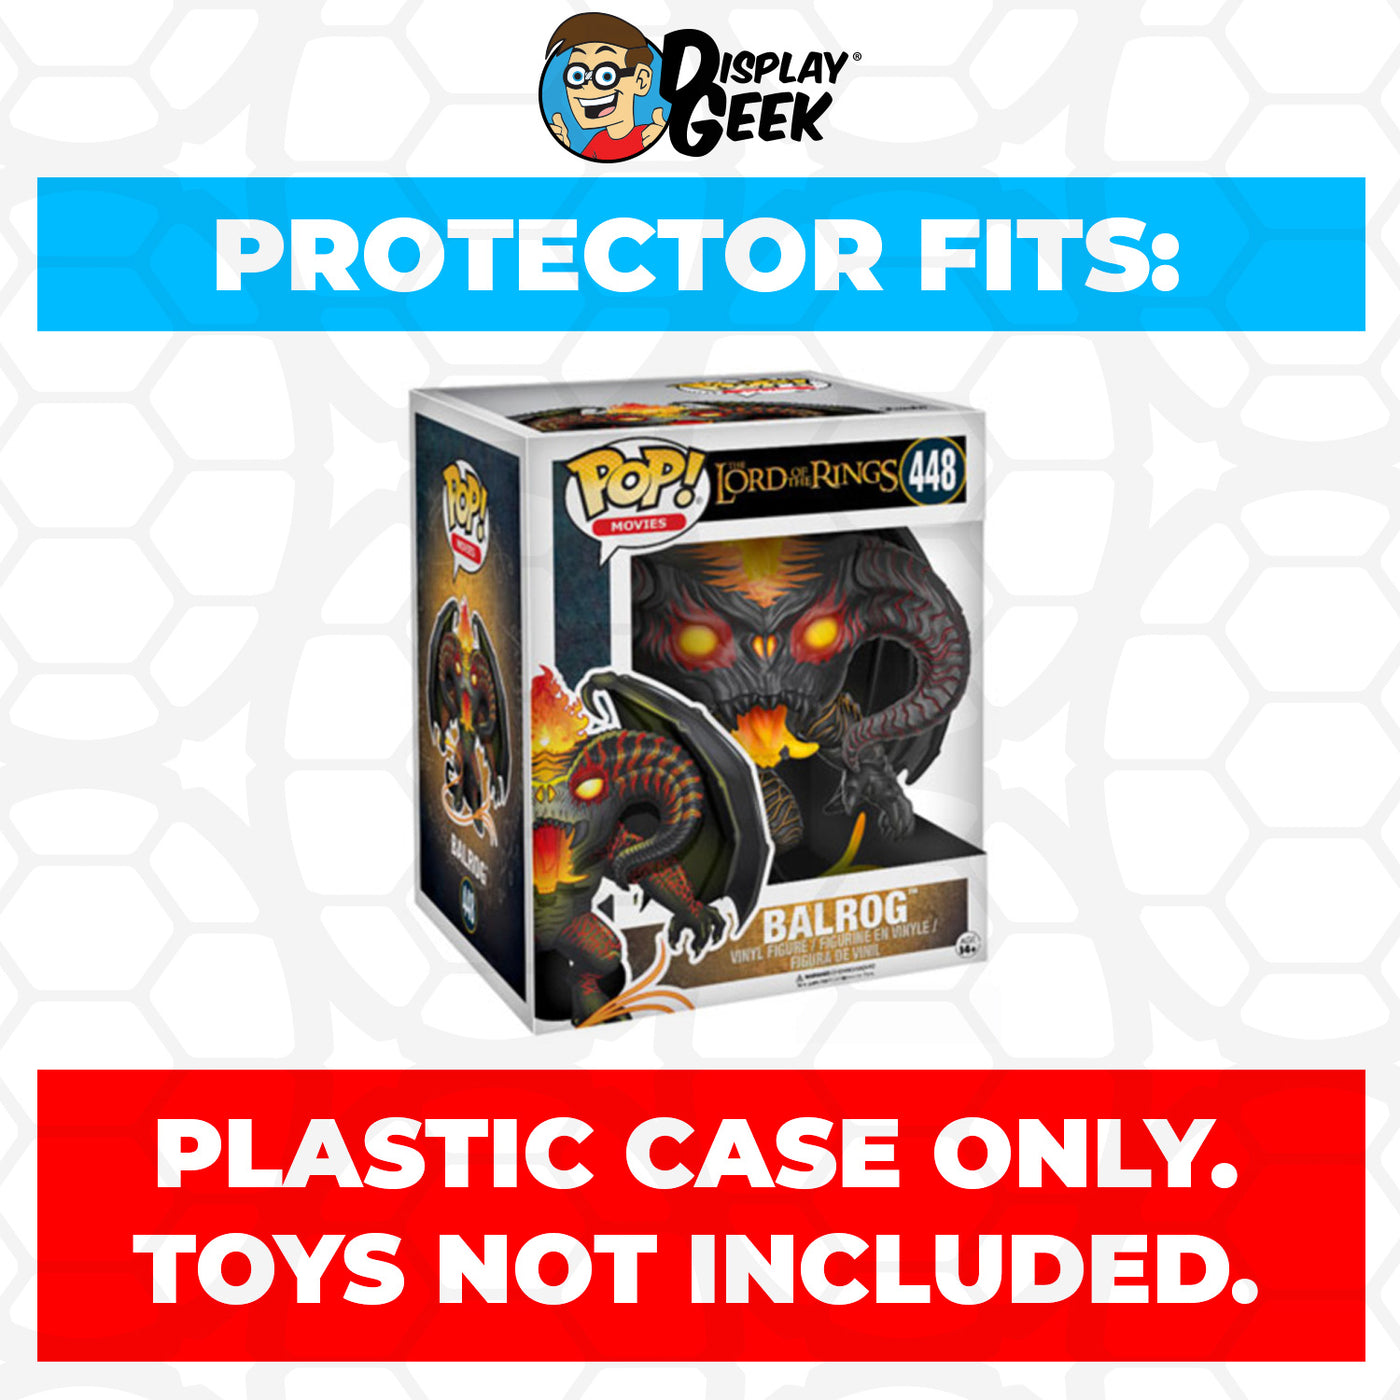 Pop Protector for 6 inch Balrog #448 Super Funko Pop on The Protector Guide App by Display Geek